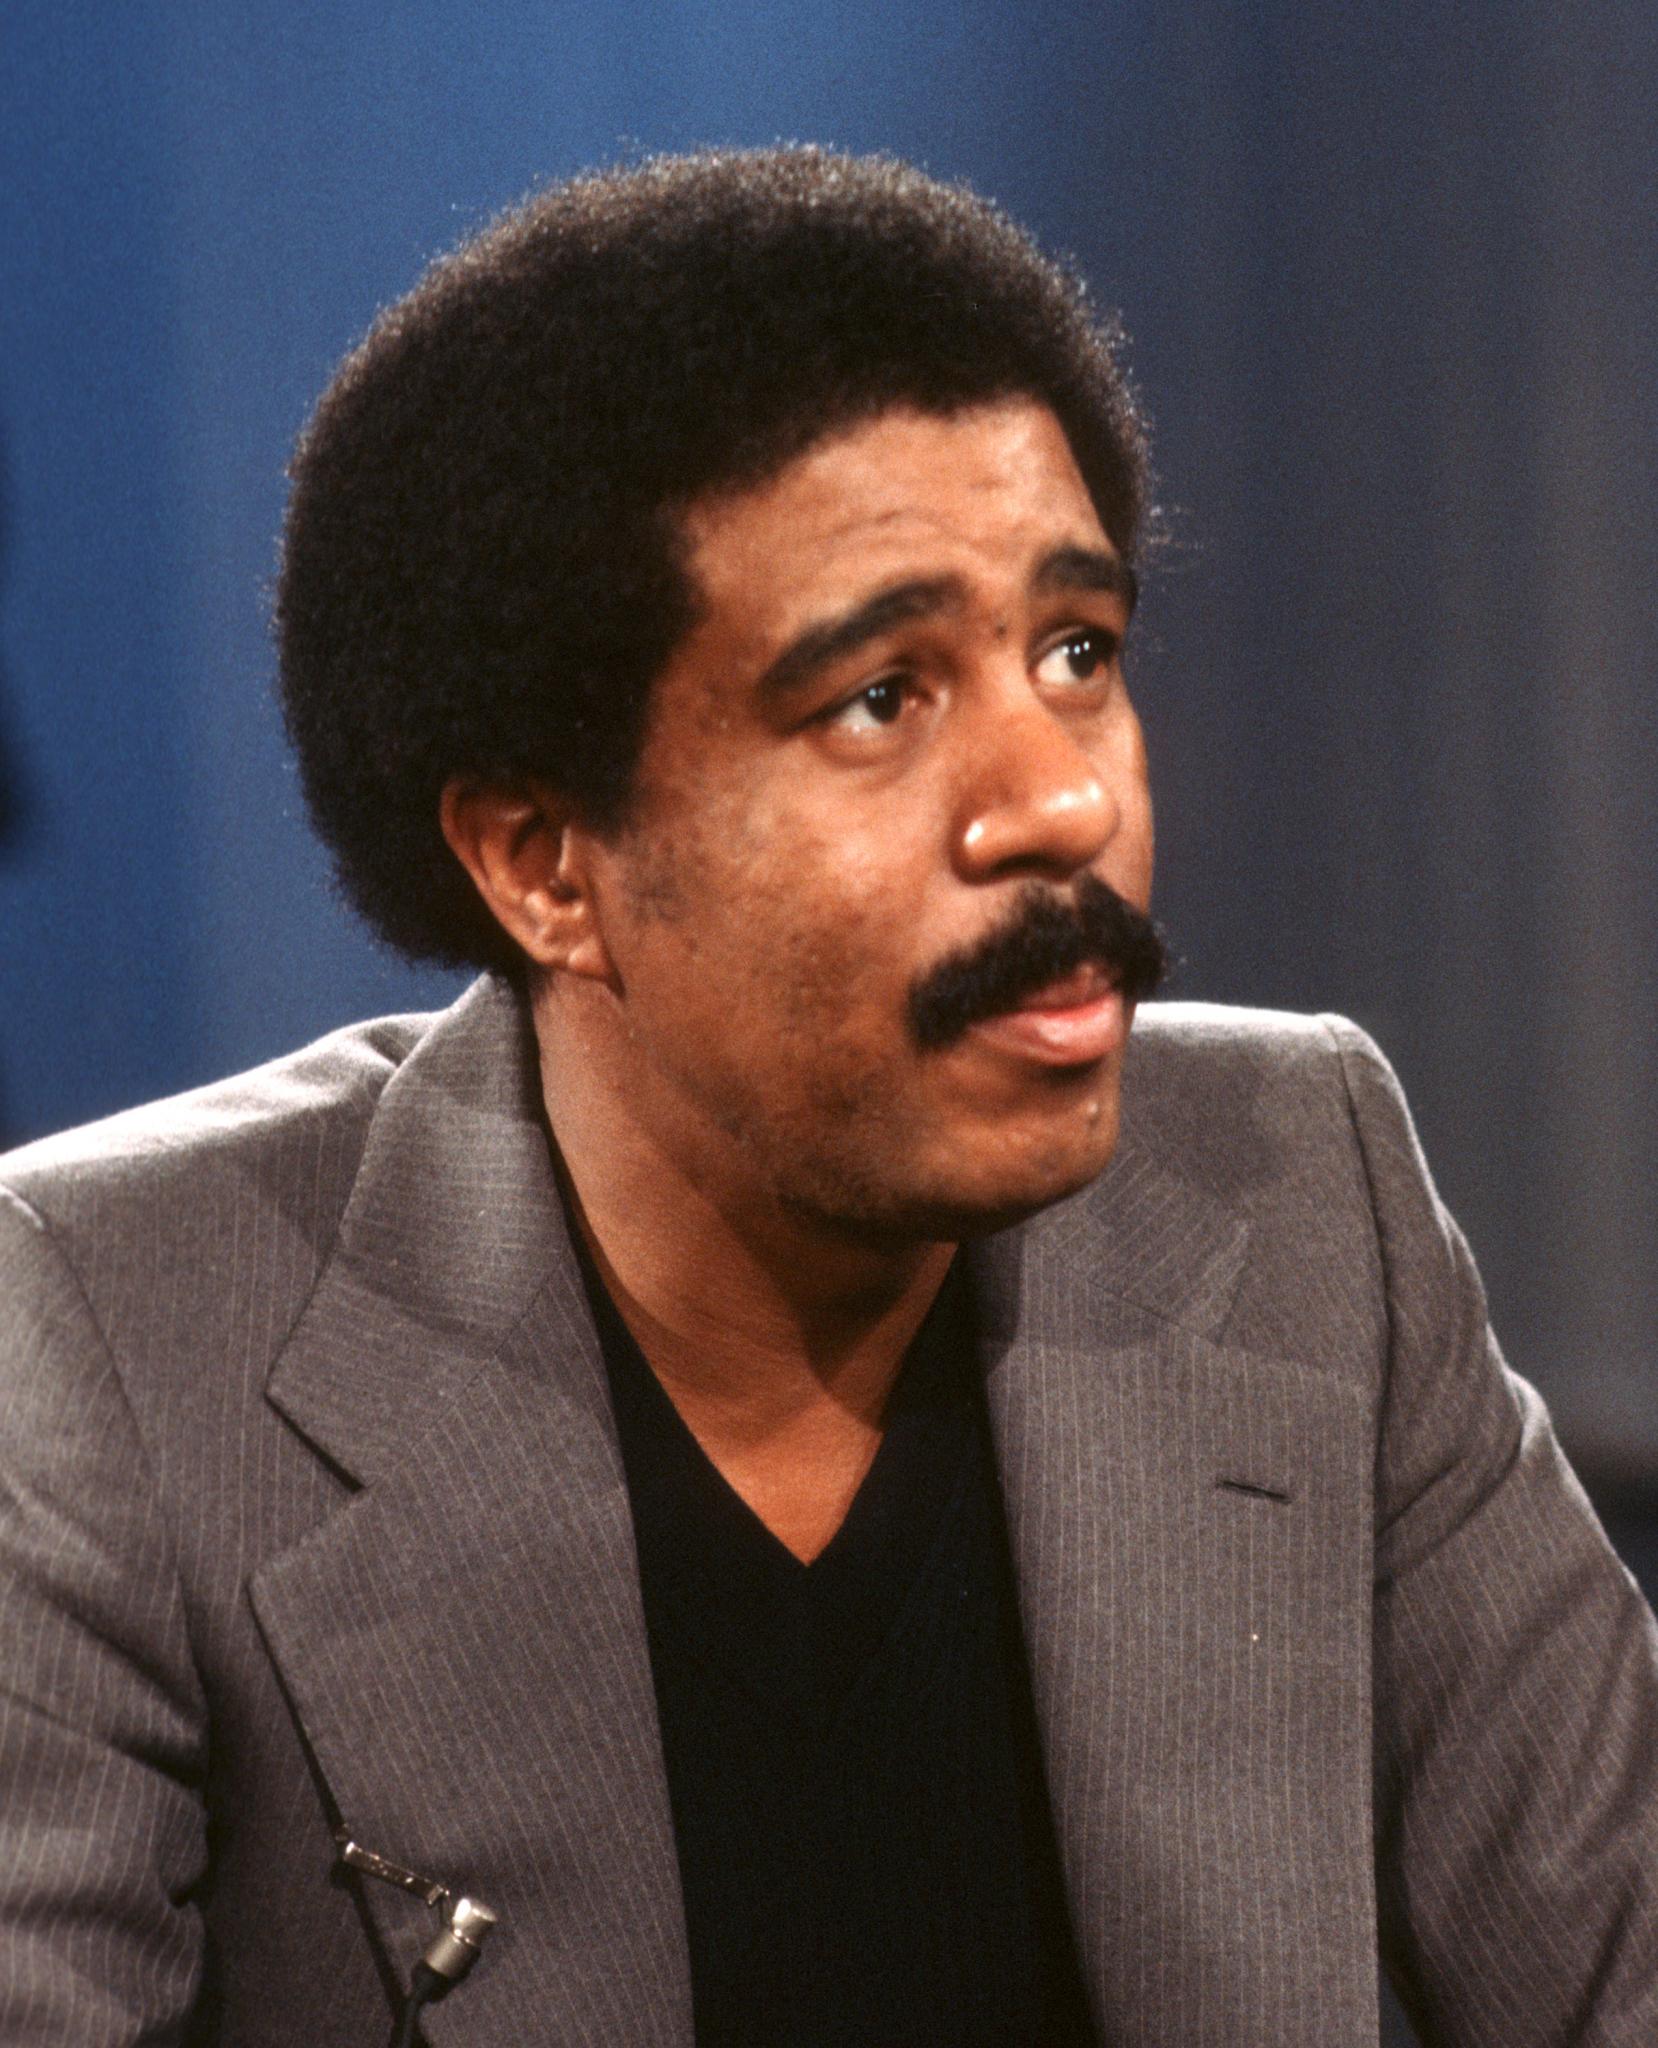 11 Times Comedians Got It Right About Race and Police Brutality